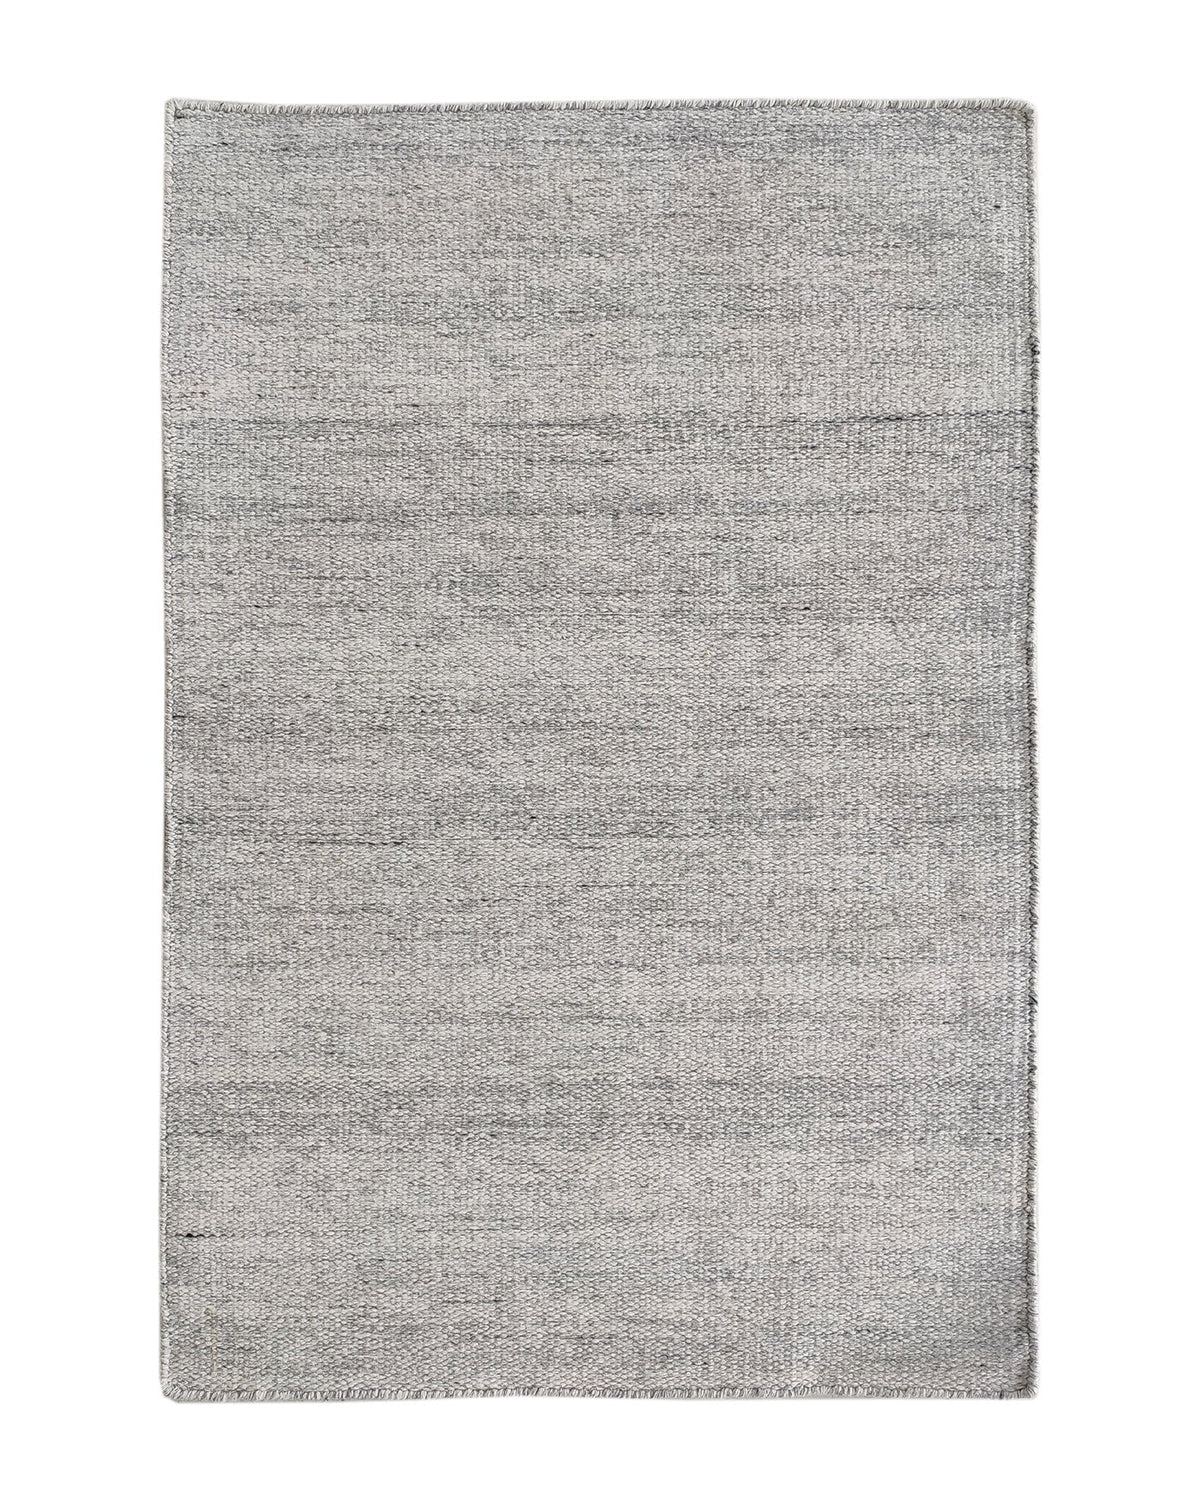 Hand Made Light Grey Woven Area Rug (2 sizes)